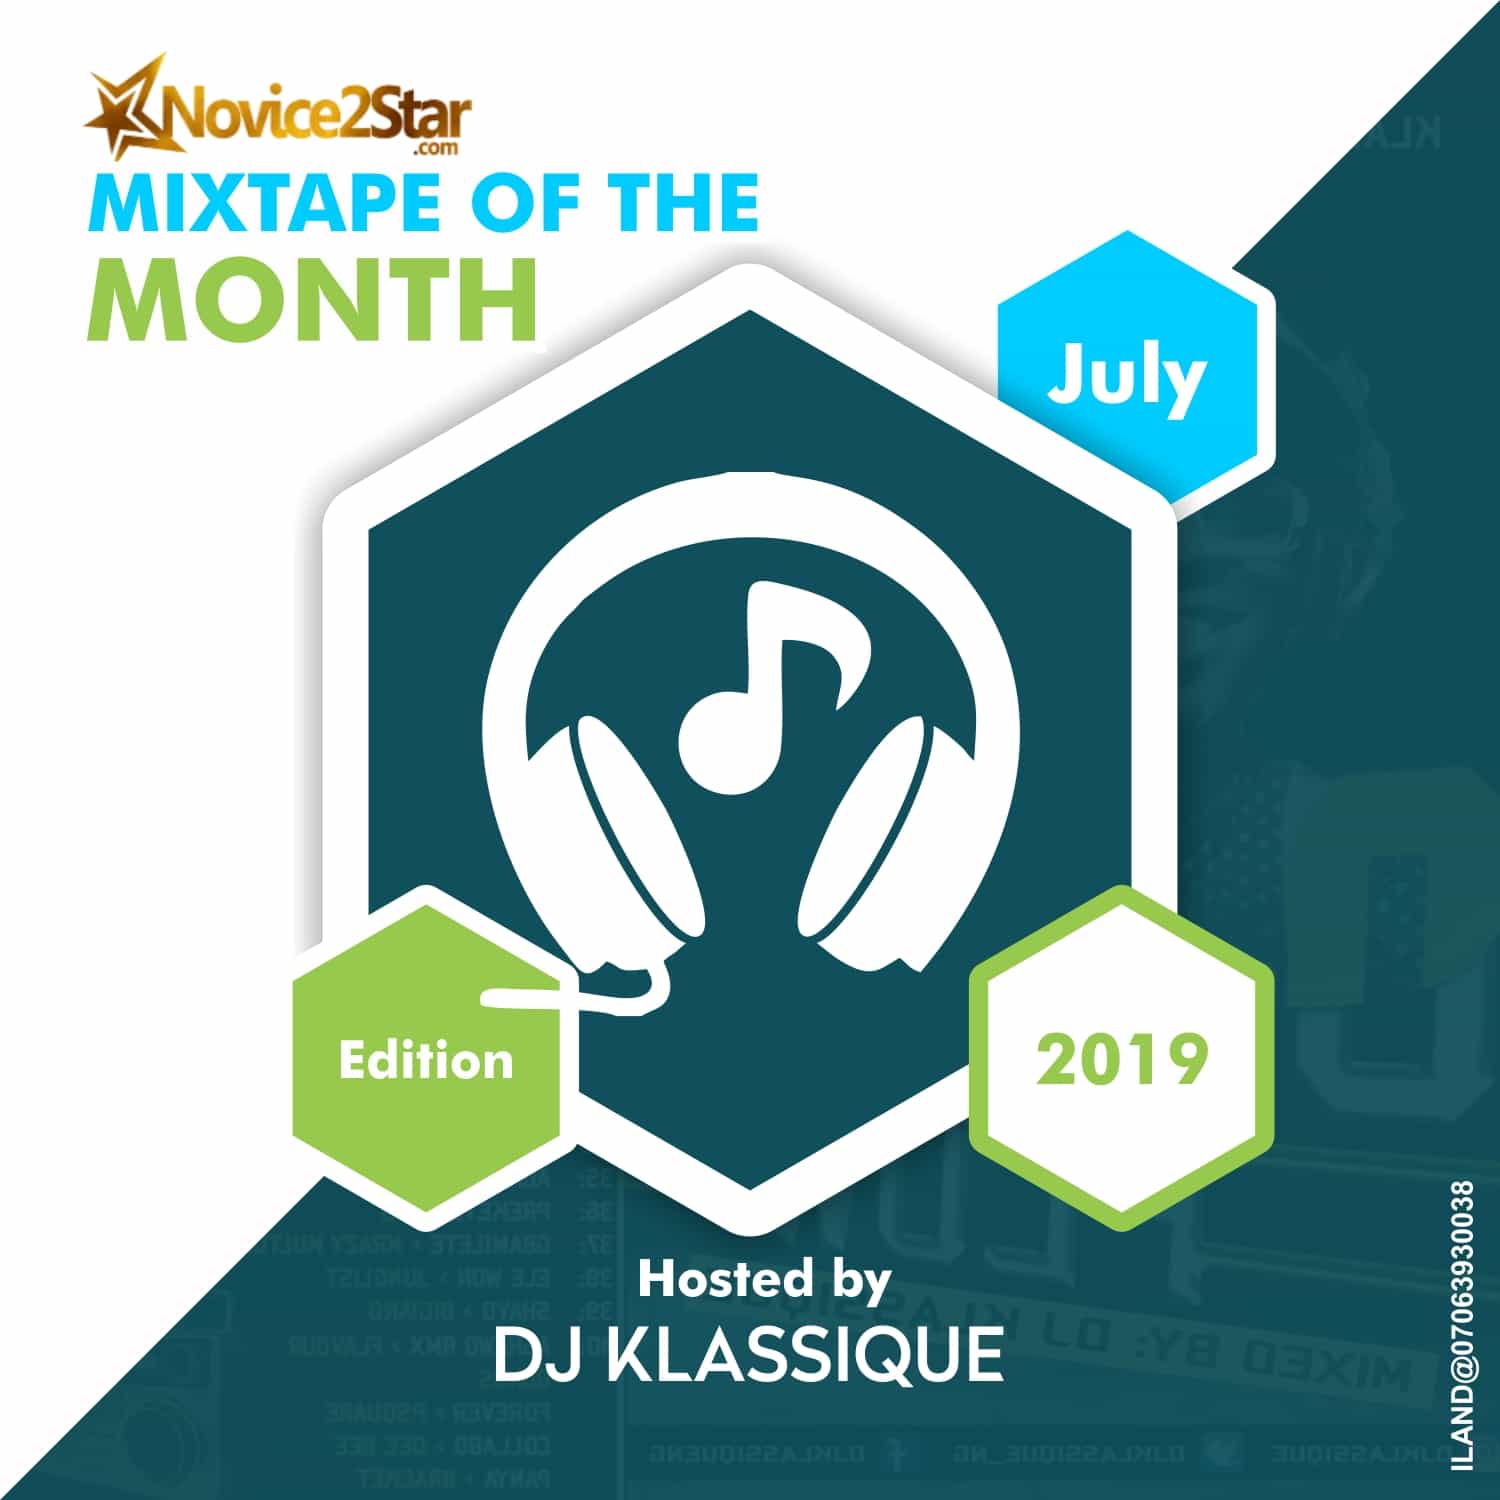 Novice2STAR Mixtape Of The Month - July Edition Hosted by DJ Klassique